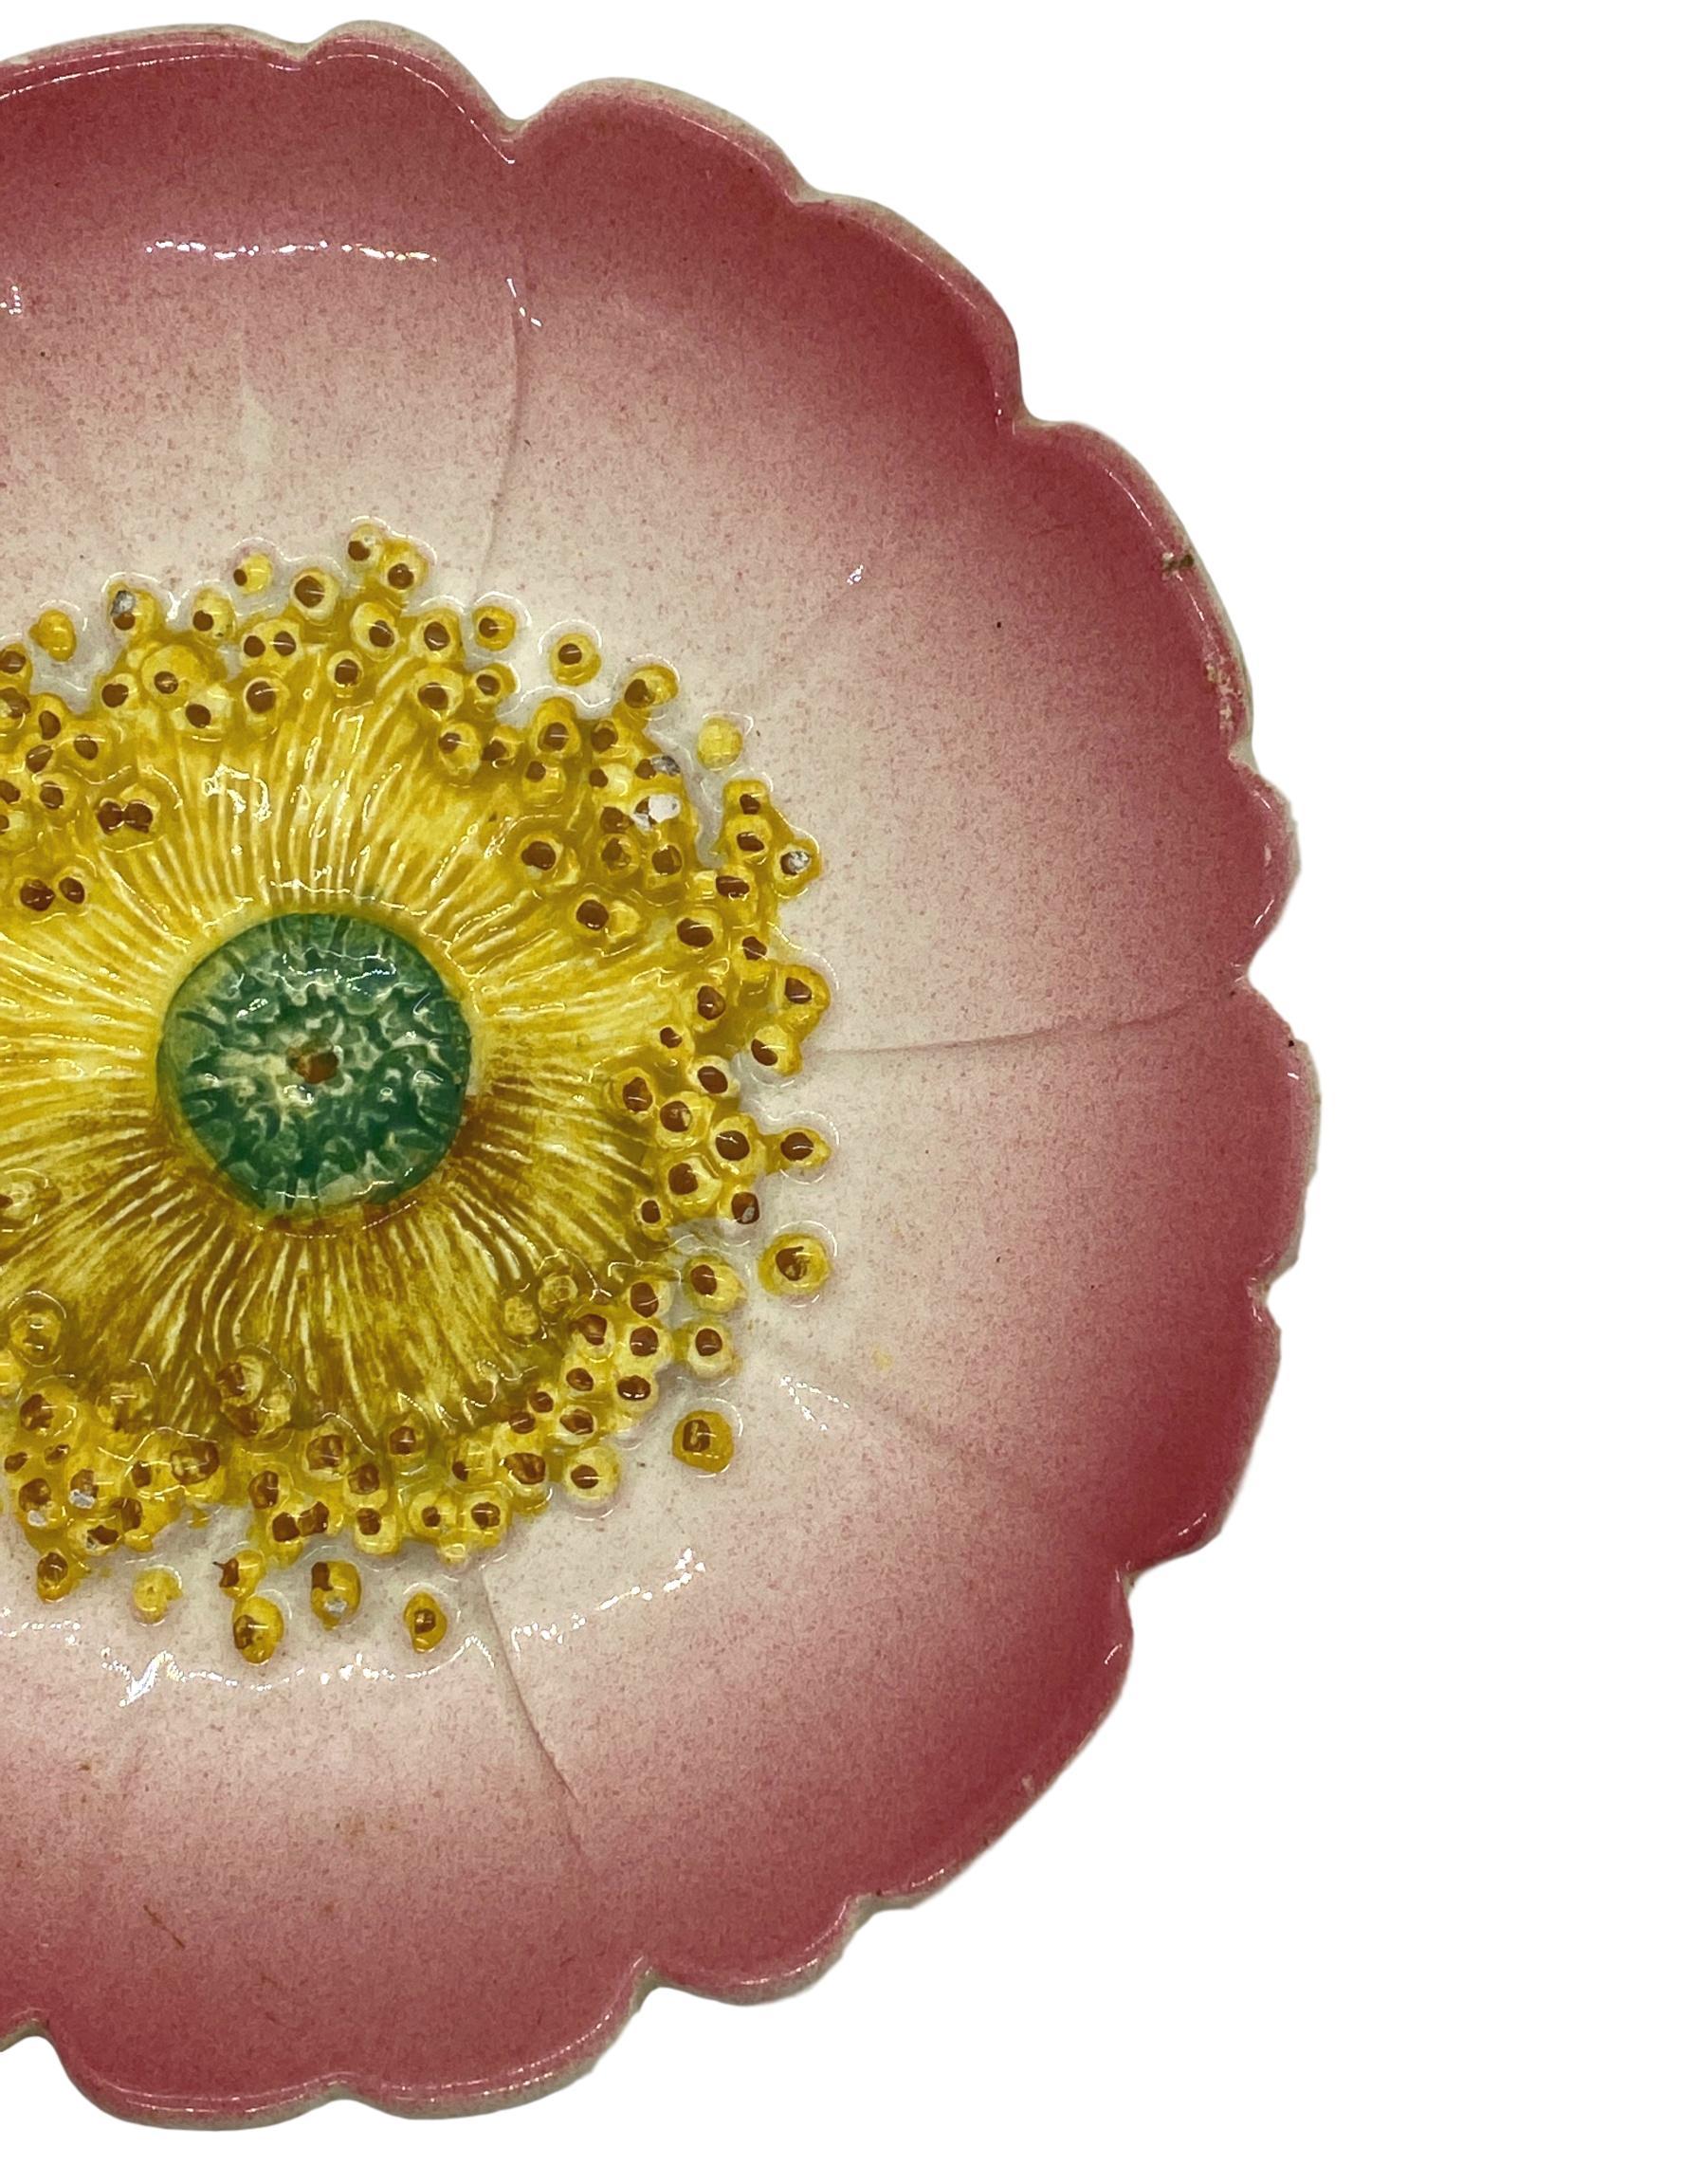 Delphin Massier Majolica (Barbotine) Trompe L'oeil pink flower plate, French, circa 1895, naturalistically molded as a rosehip flower.
Measurements: Diameter 7.75 x height 1.25.
For over 28 years we have been among the world's preeminent